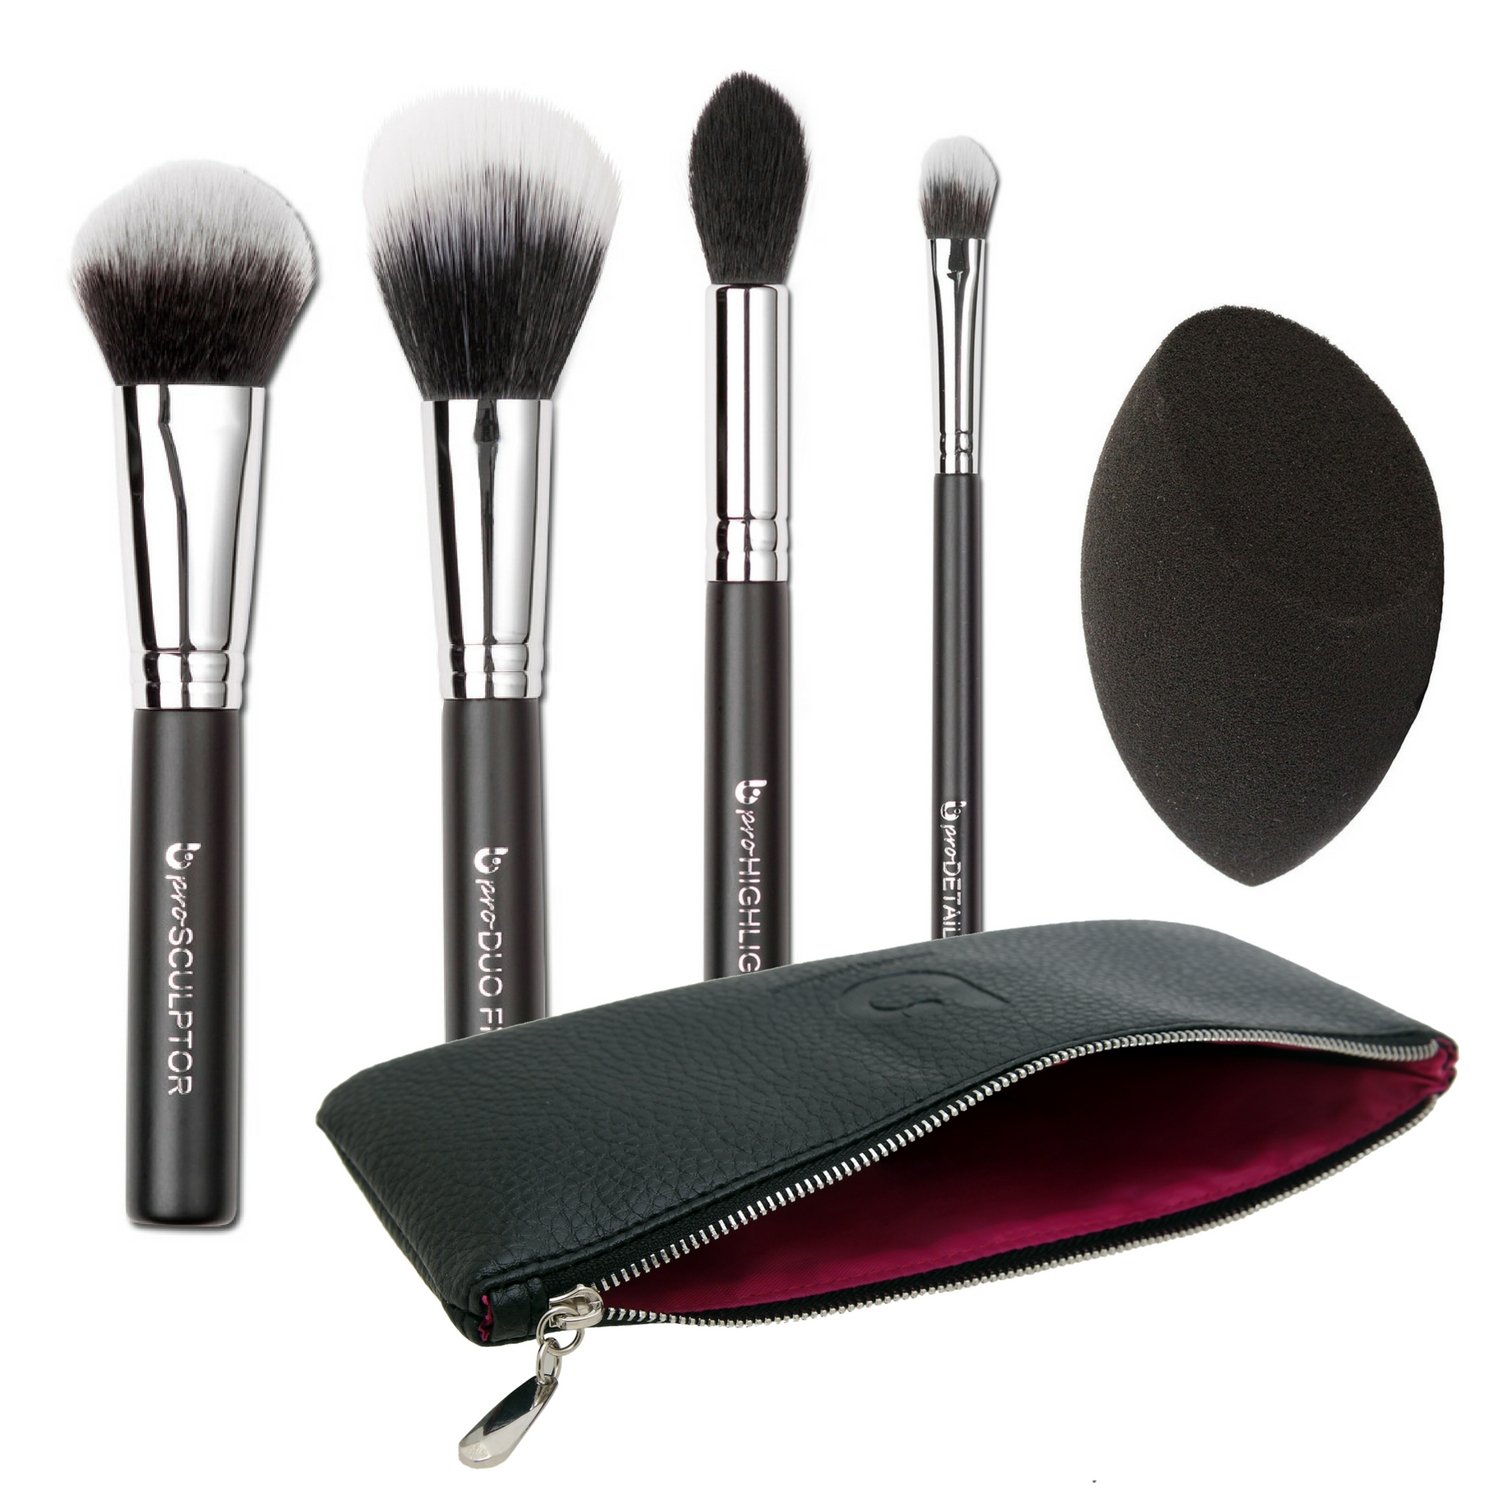 Contour Highlighter Makeup Brush Set with Case – Beauty Junkees 5pc Brushes Kit with Blender Sponge for Full Face Contouring Sculpting Highlighting with Powder Cream Cosmetics, Soft Synthetic Vegan